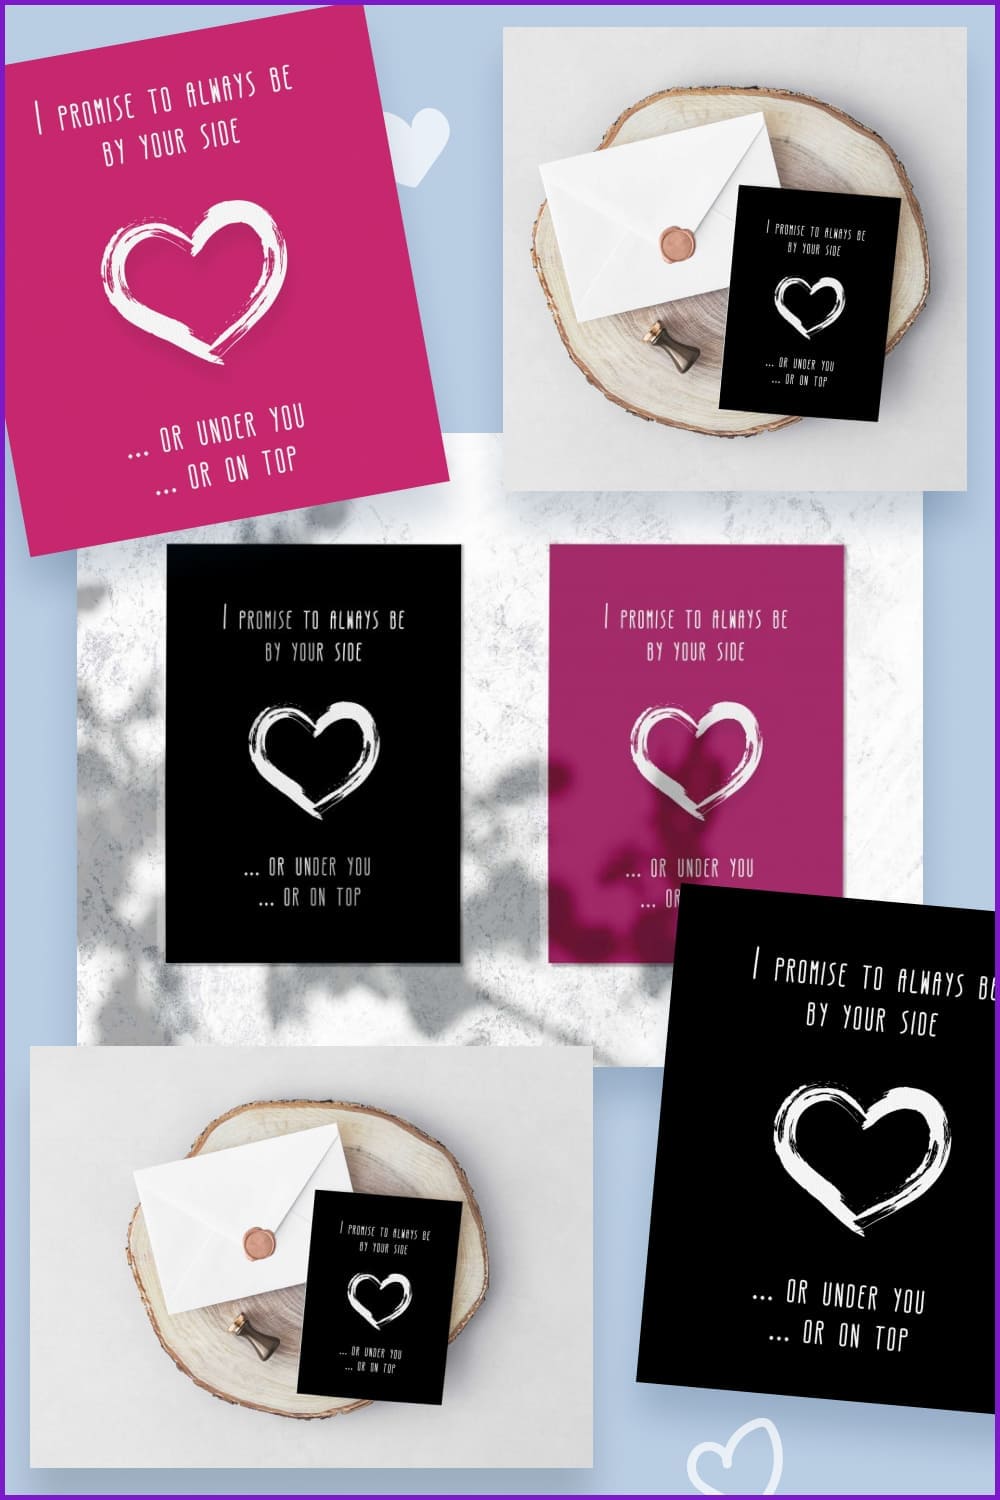 Black and pink cards with heart and sign.